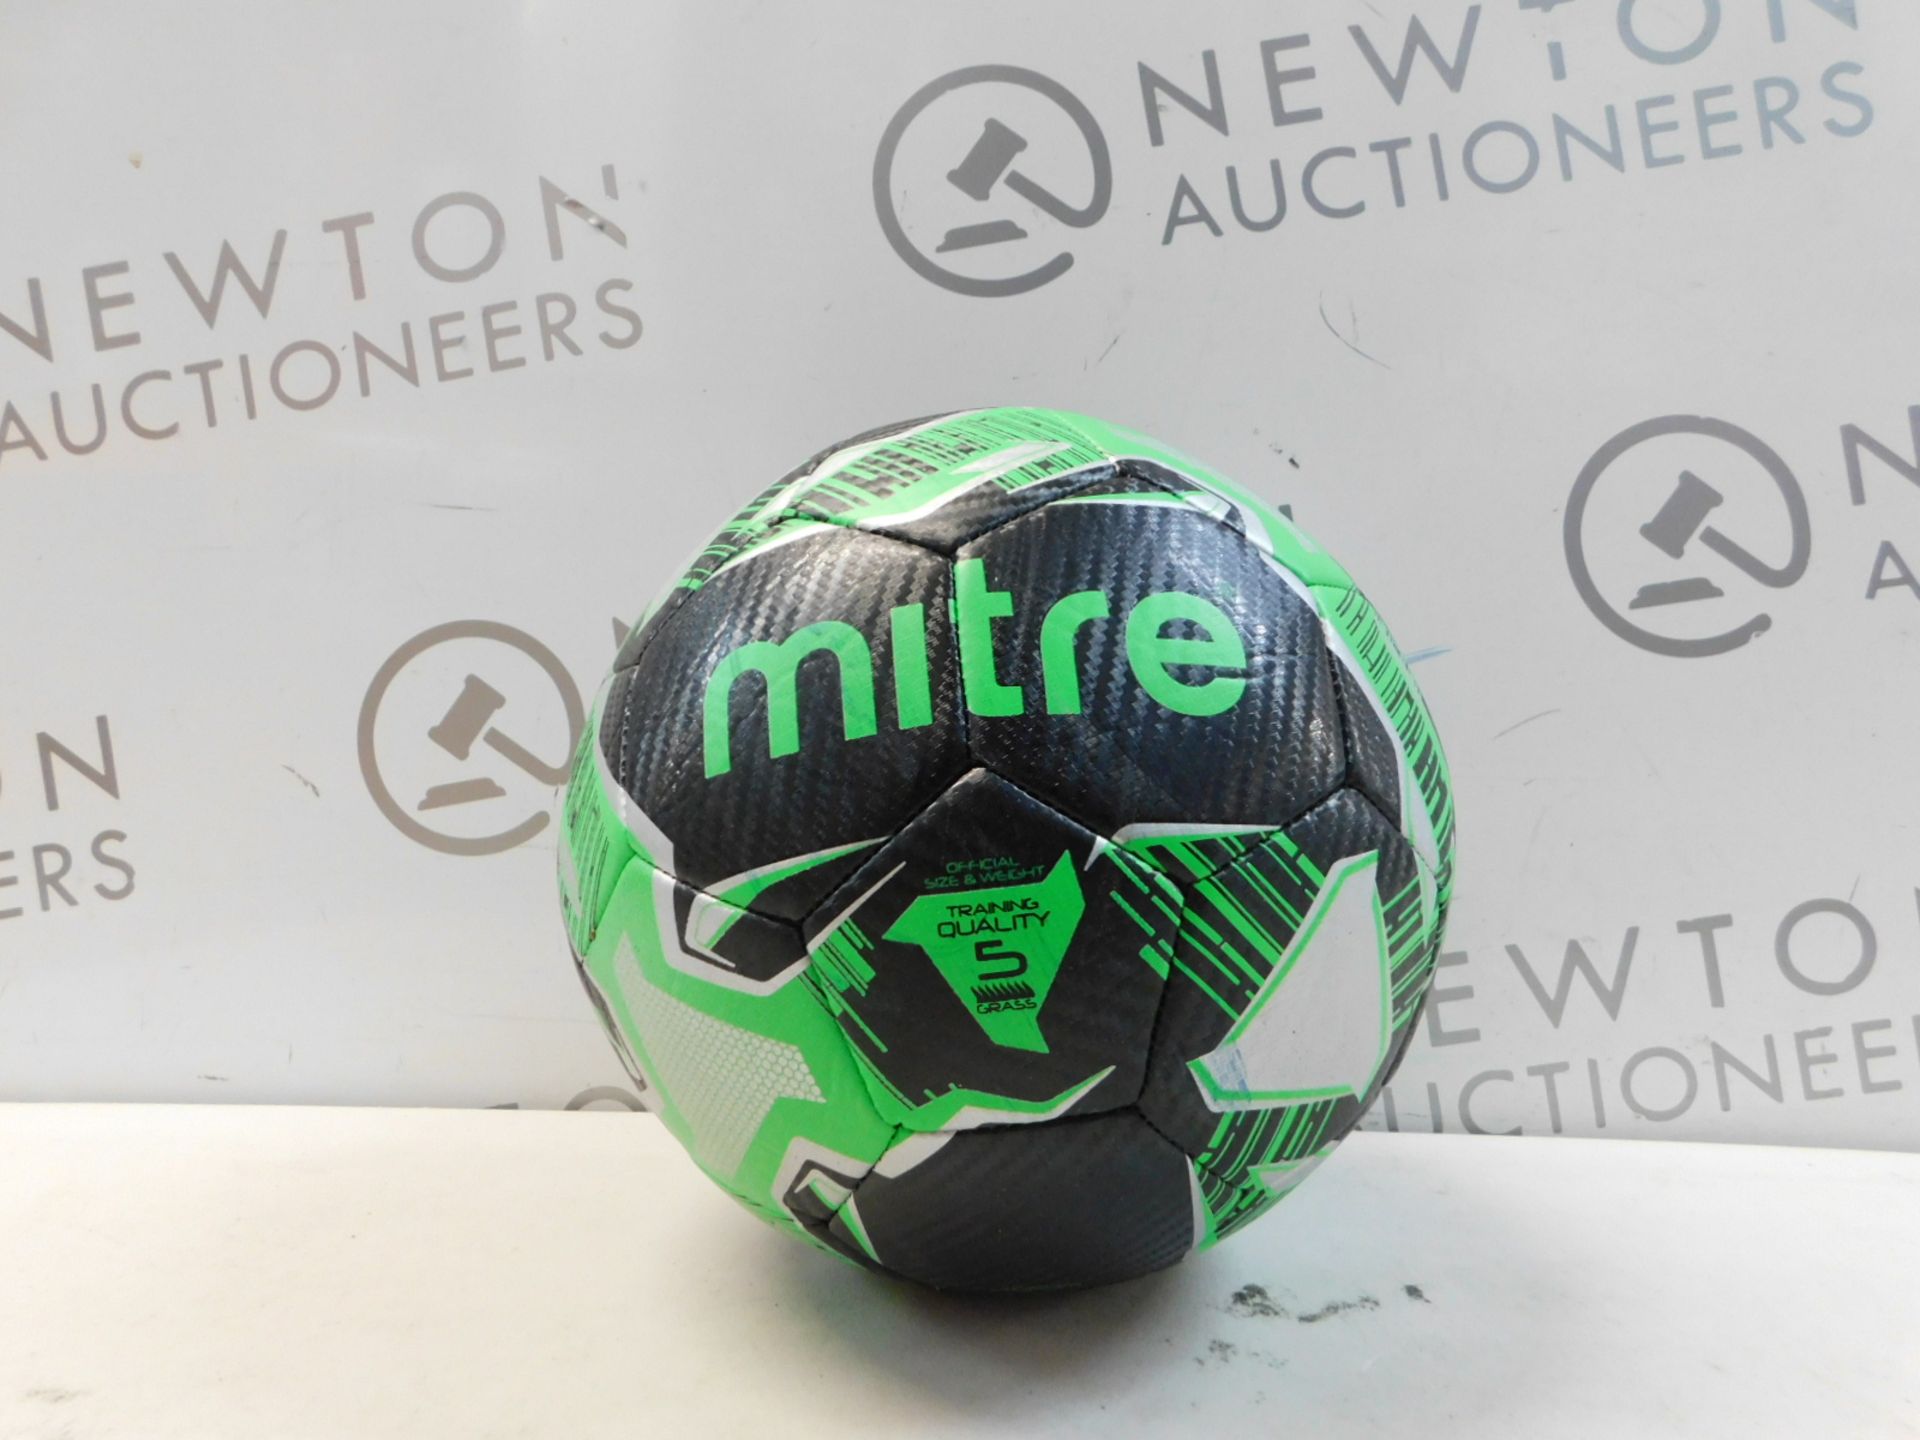 1 MITRE RELAY SIZE 5 FOOTBALL RRP Â£29.99